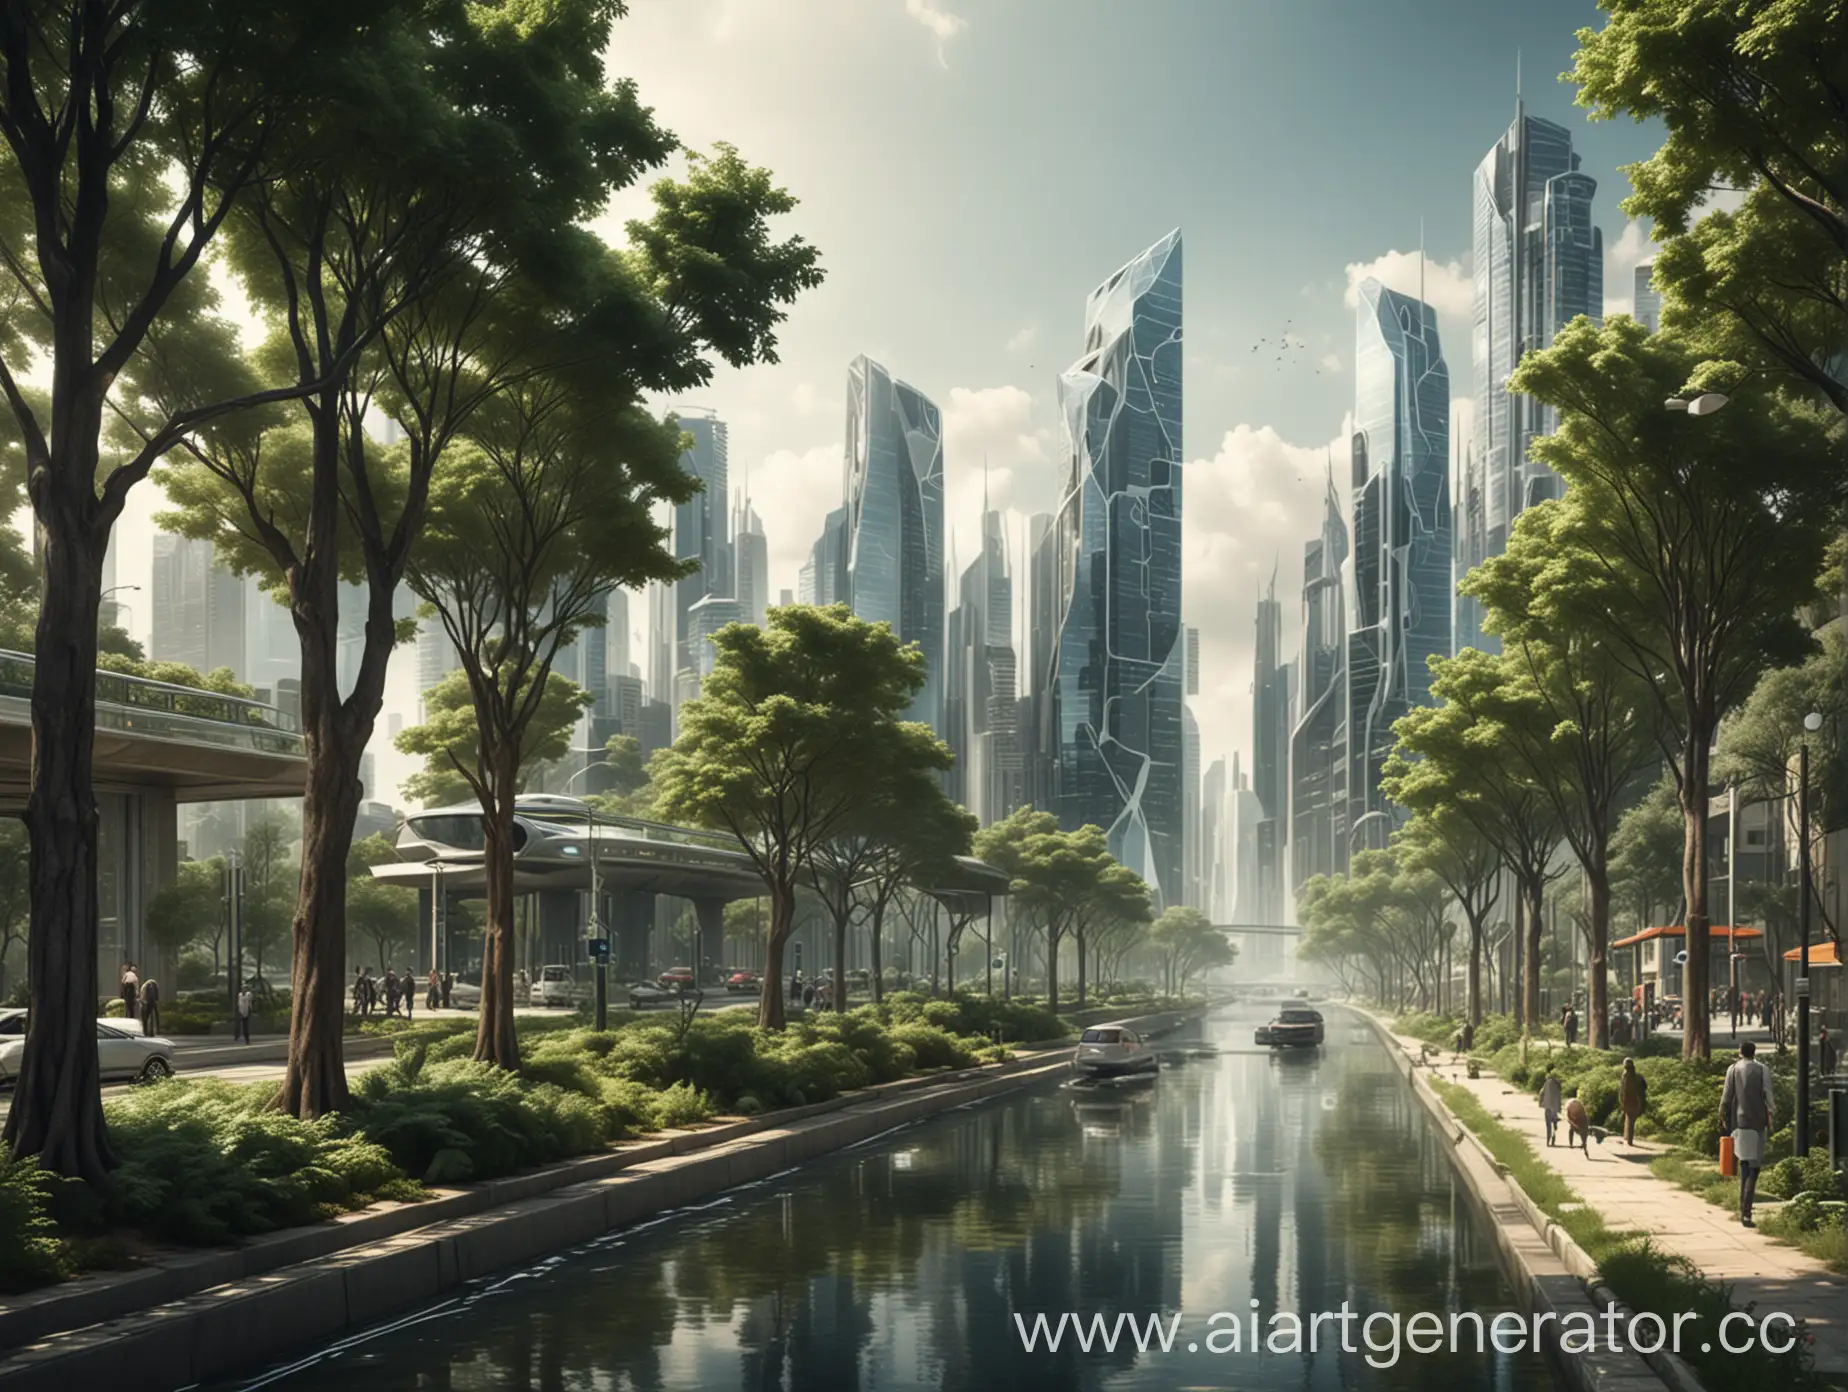 Futuristic-Smart-City-with-Realistic-Urban-Landscapes-and-Lush-Green-Trees